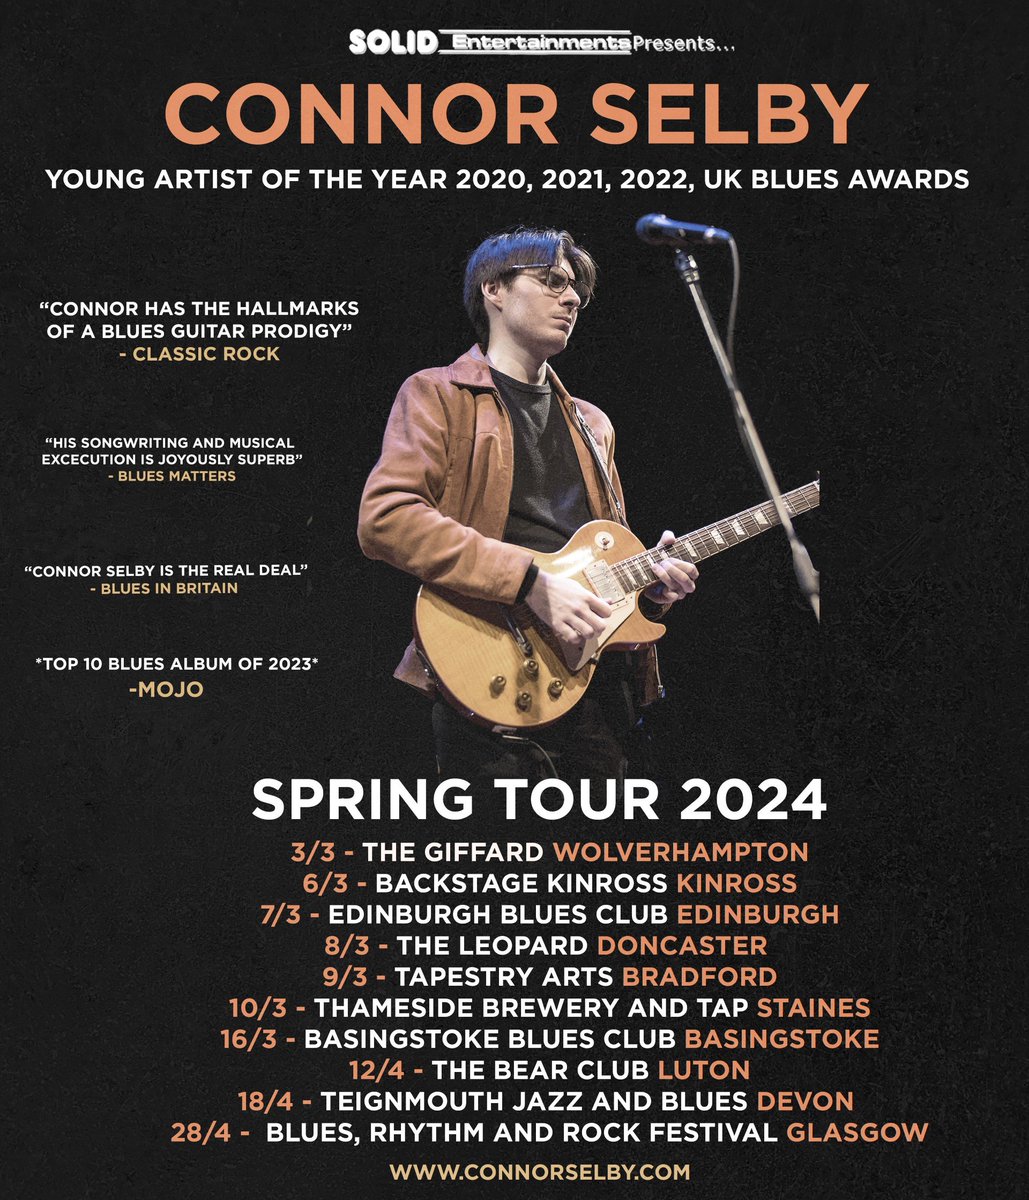 Get ready UK blues fans! Connor Selby is hitting the road this week for his 2024 Spring tour and you do not want to miss it!  

Photo credit Graham Hutton Photography

Ticket link below 👇 

solidentertainments.com/presents.htm#C…

 #UKBlues